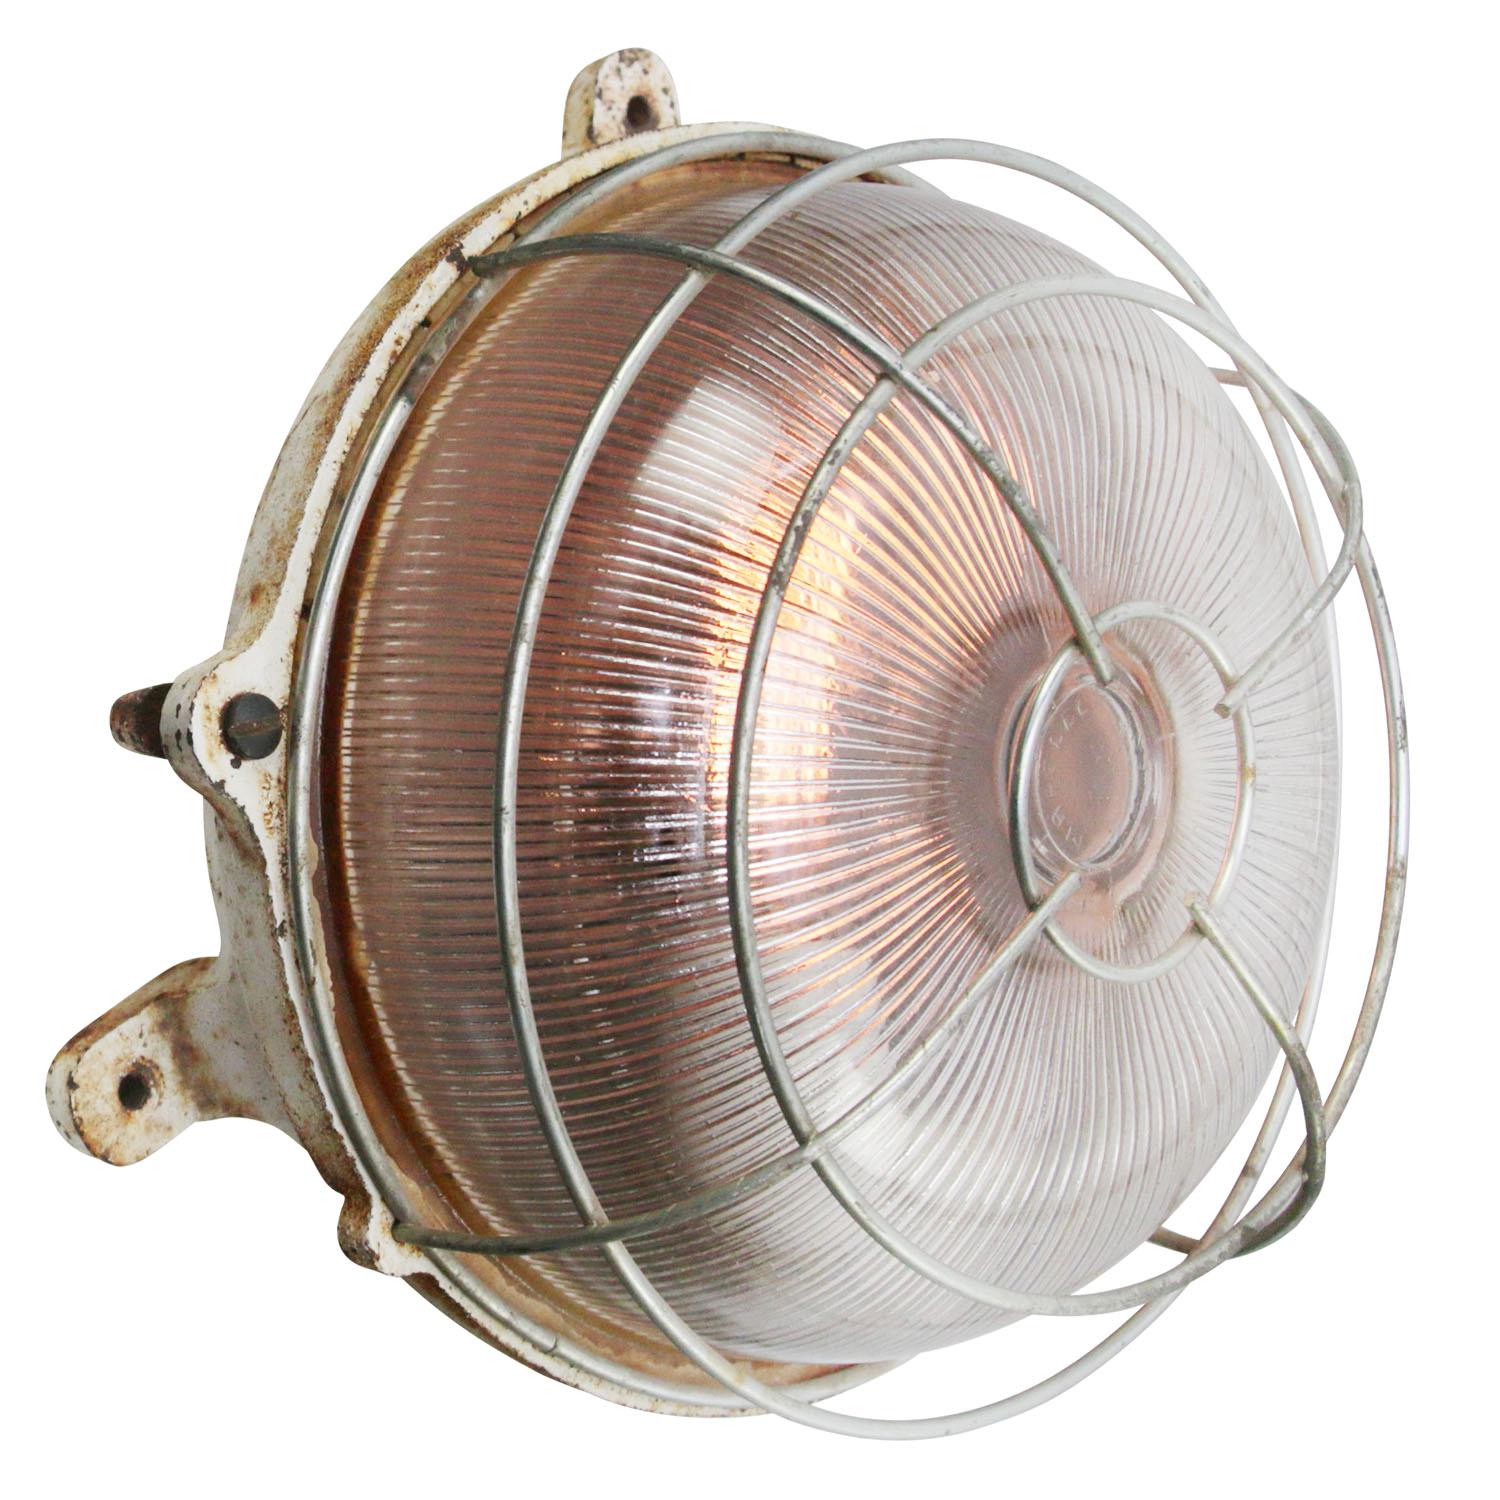 French Industrial wall / ceiling lamp by Mapelec, Amiens, France
Cast Iron back with clear striped glass.

Measure: weight 4.40 kg / 9.7 lb

Priced per individual item. All lamps have been made suitable by international standards for